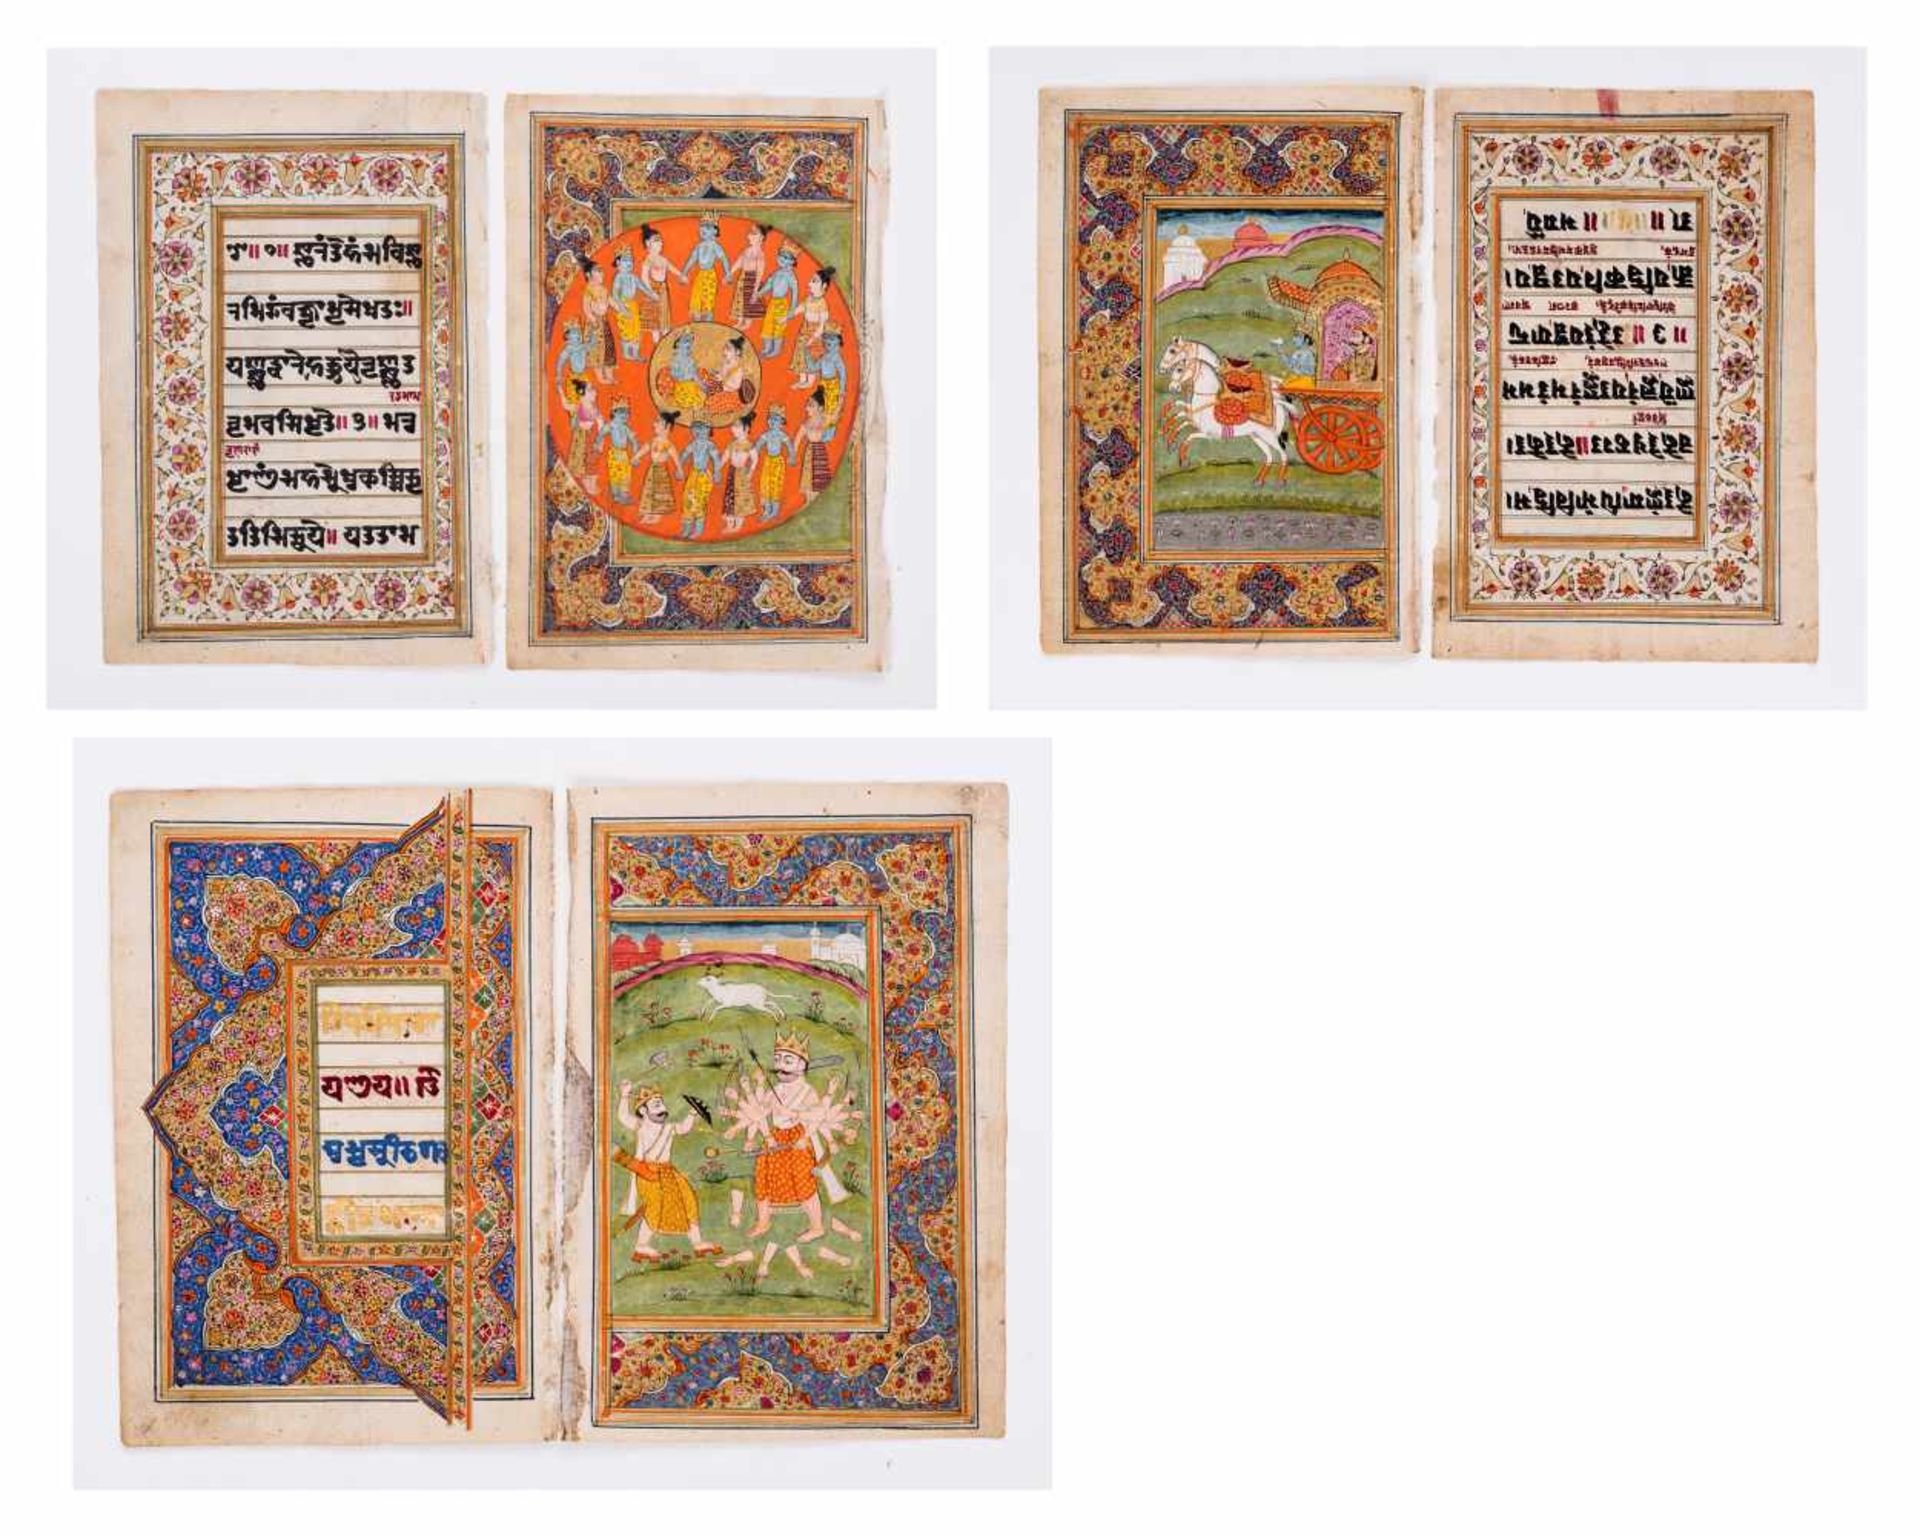 SIX MINIATURE PAINTINGS DEPICTING DEITIES - INDIA, 19th CENTURYMiniature painting with colors and